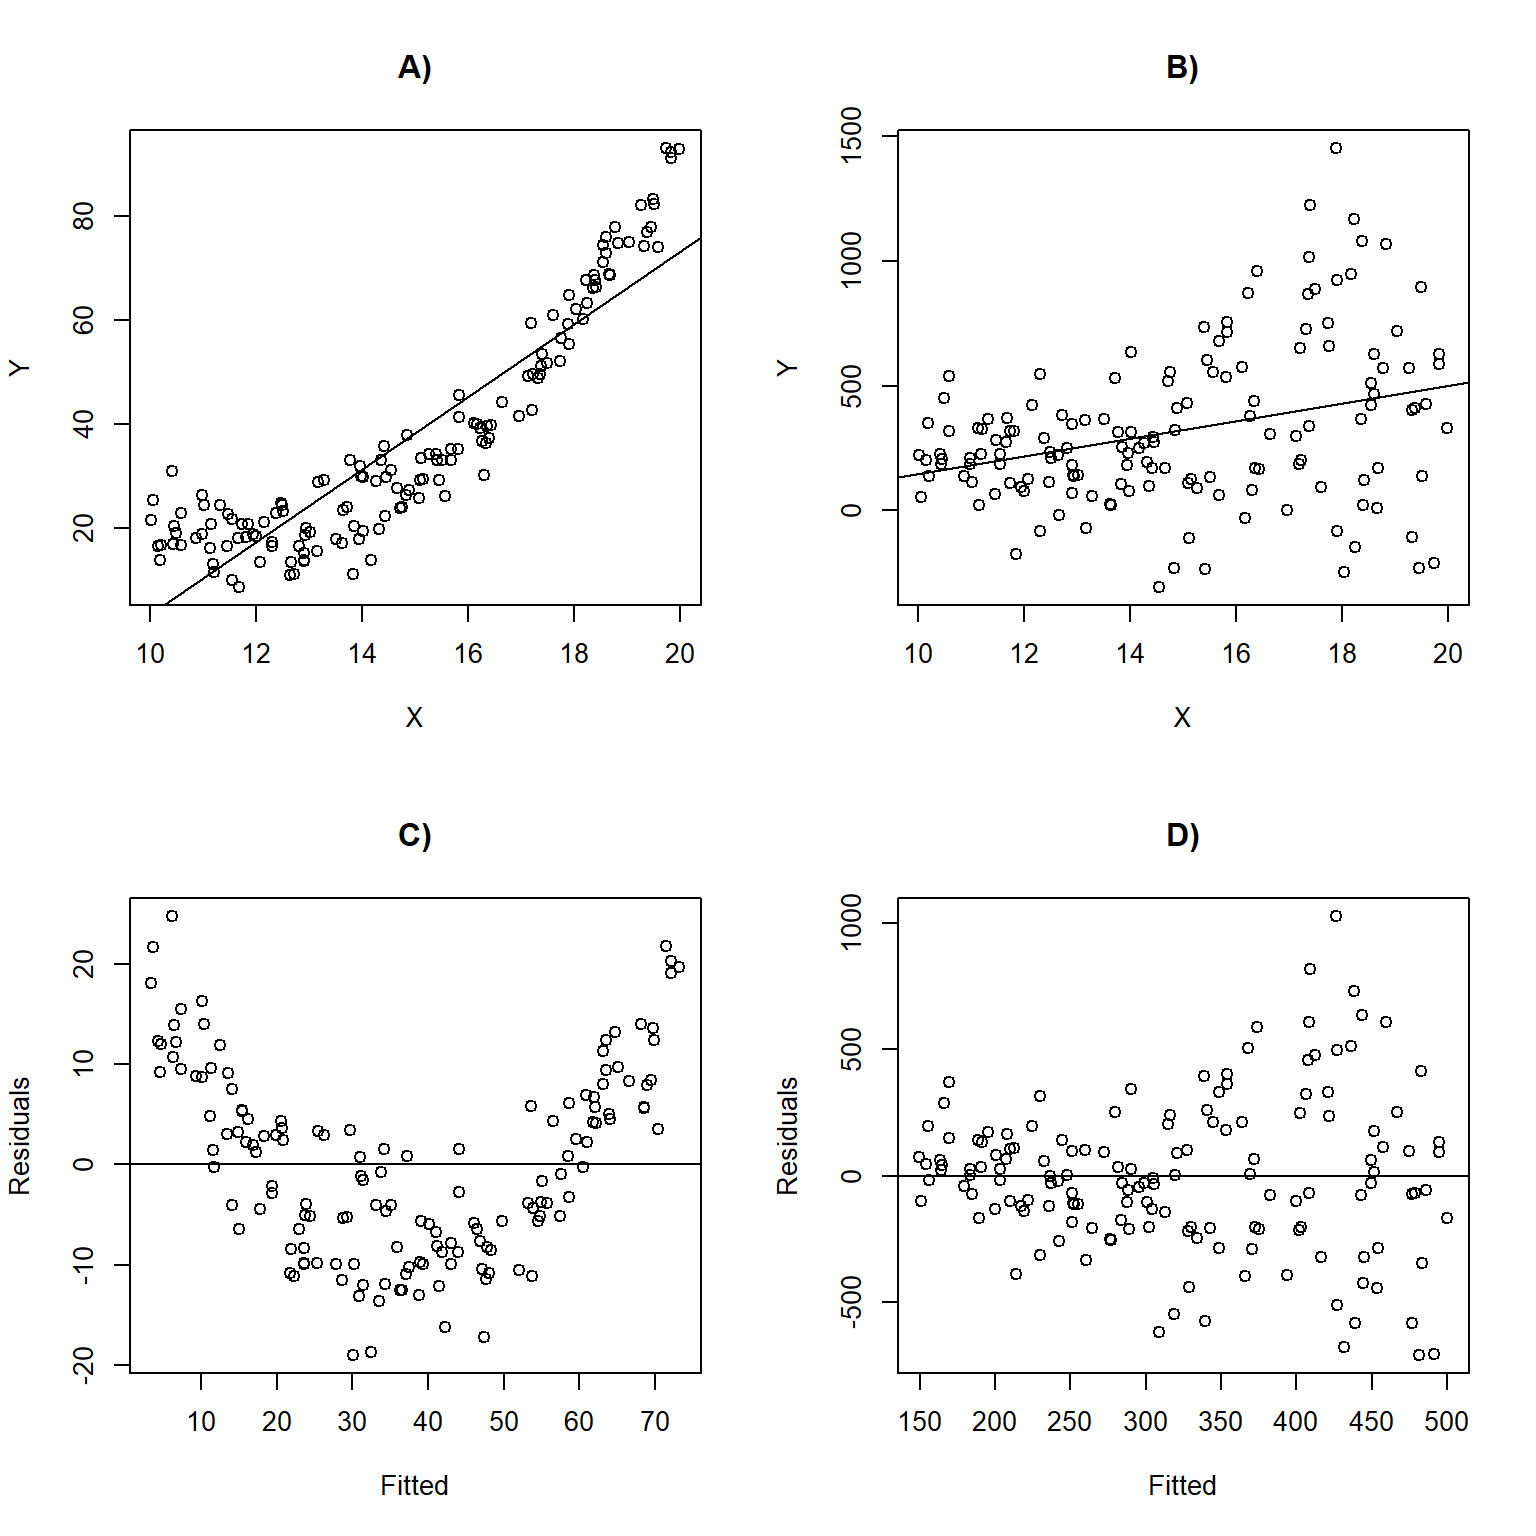 Linear regression lines with data overlayed and residual versus fitted values plots for situations in which the assumptions are violated. Panels (A, C) depict a situation where the linearity assumption is violated. Panels (B, D) depict a scenario where the constant variance assumption is violated.